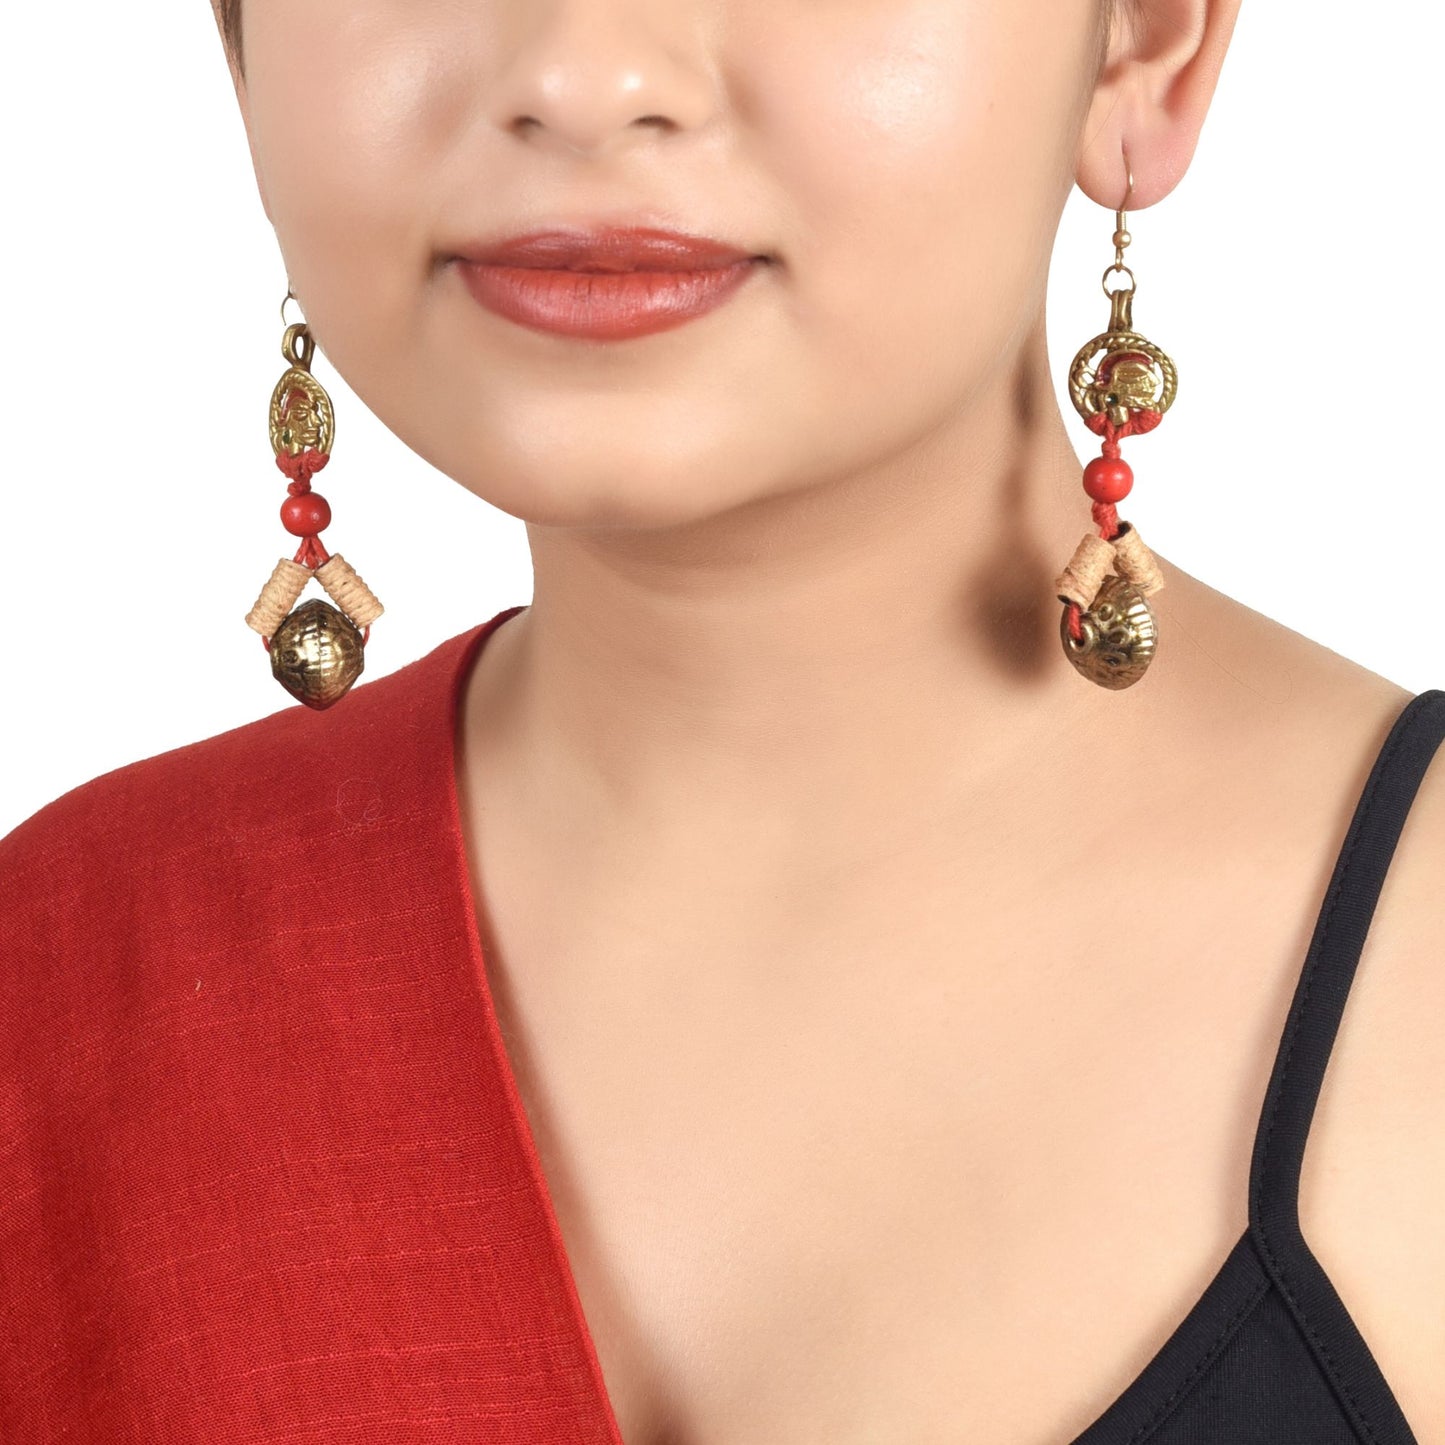 The Queen Noble Handcrafted Tribal Earrings